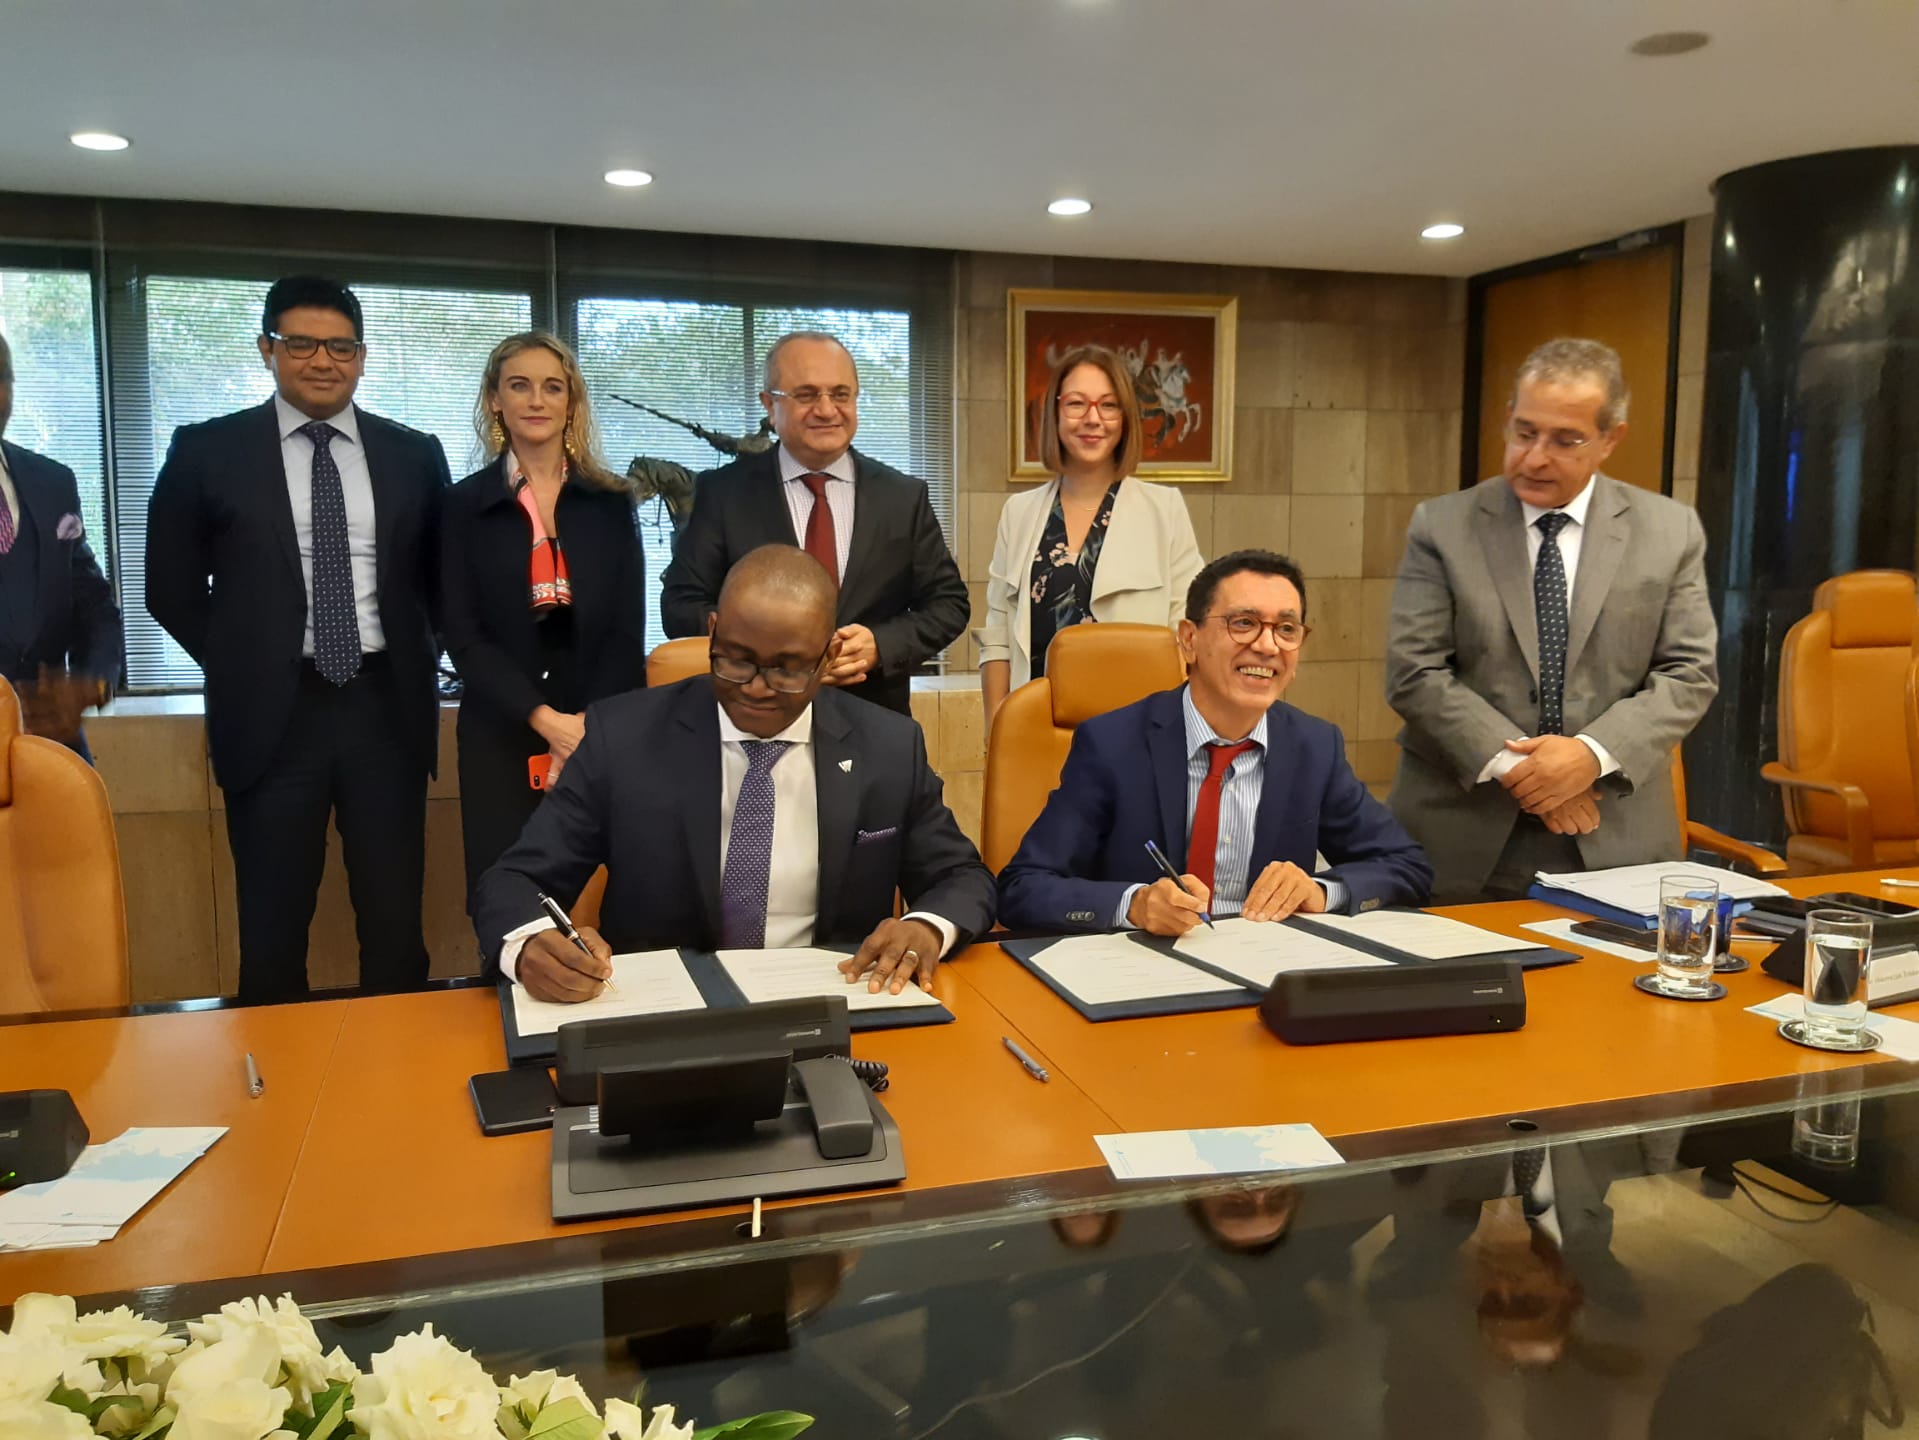 BANK OF AFRICA GROUP SIGNS A MEMORANDUM OF UNDERSTANDING WITH WEMA BANK, A NIGERIAN COMMERCIAL BANK BASED IN LAGOS.